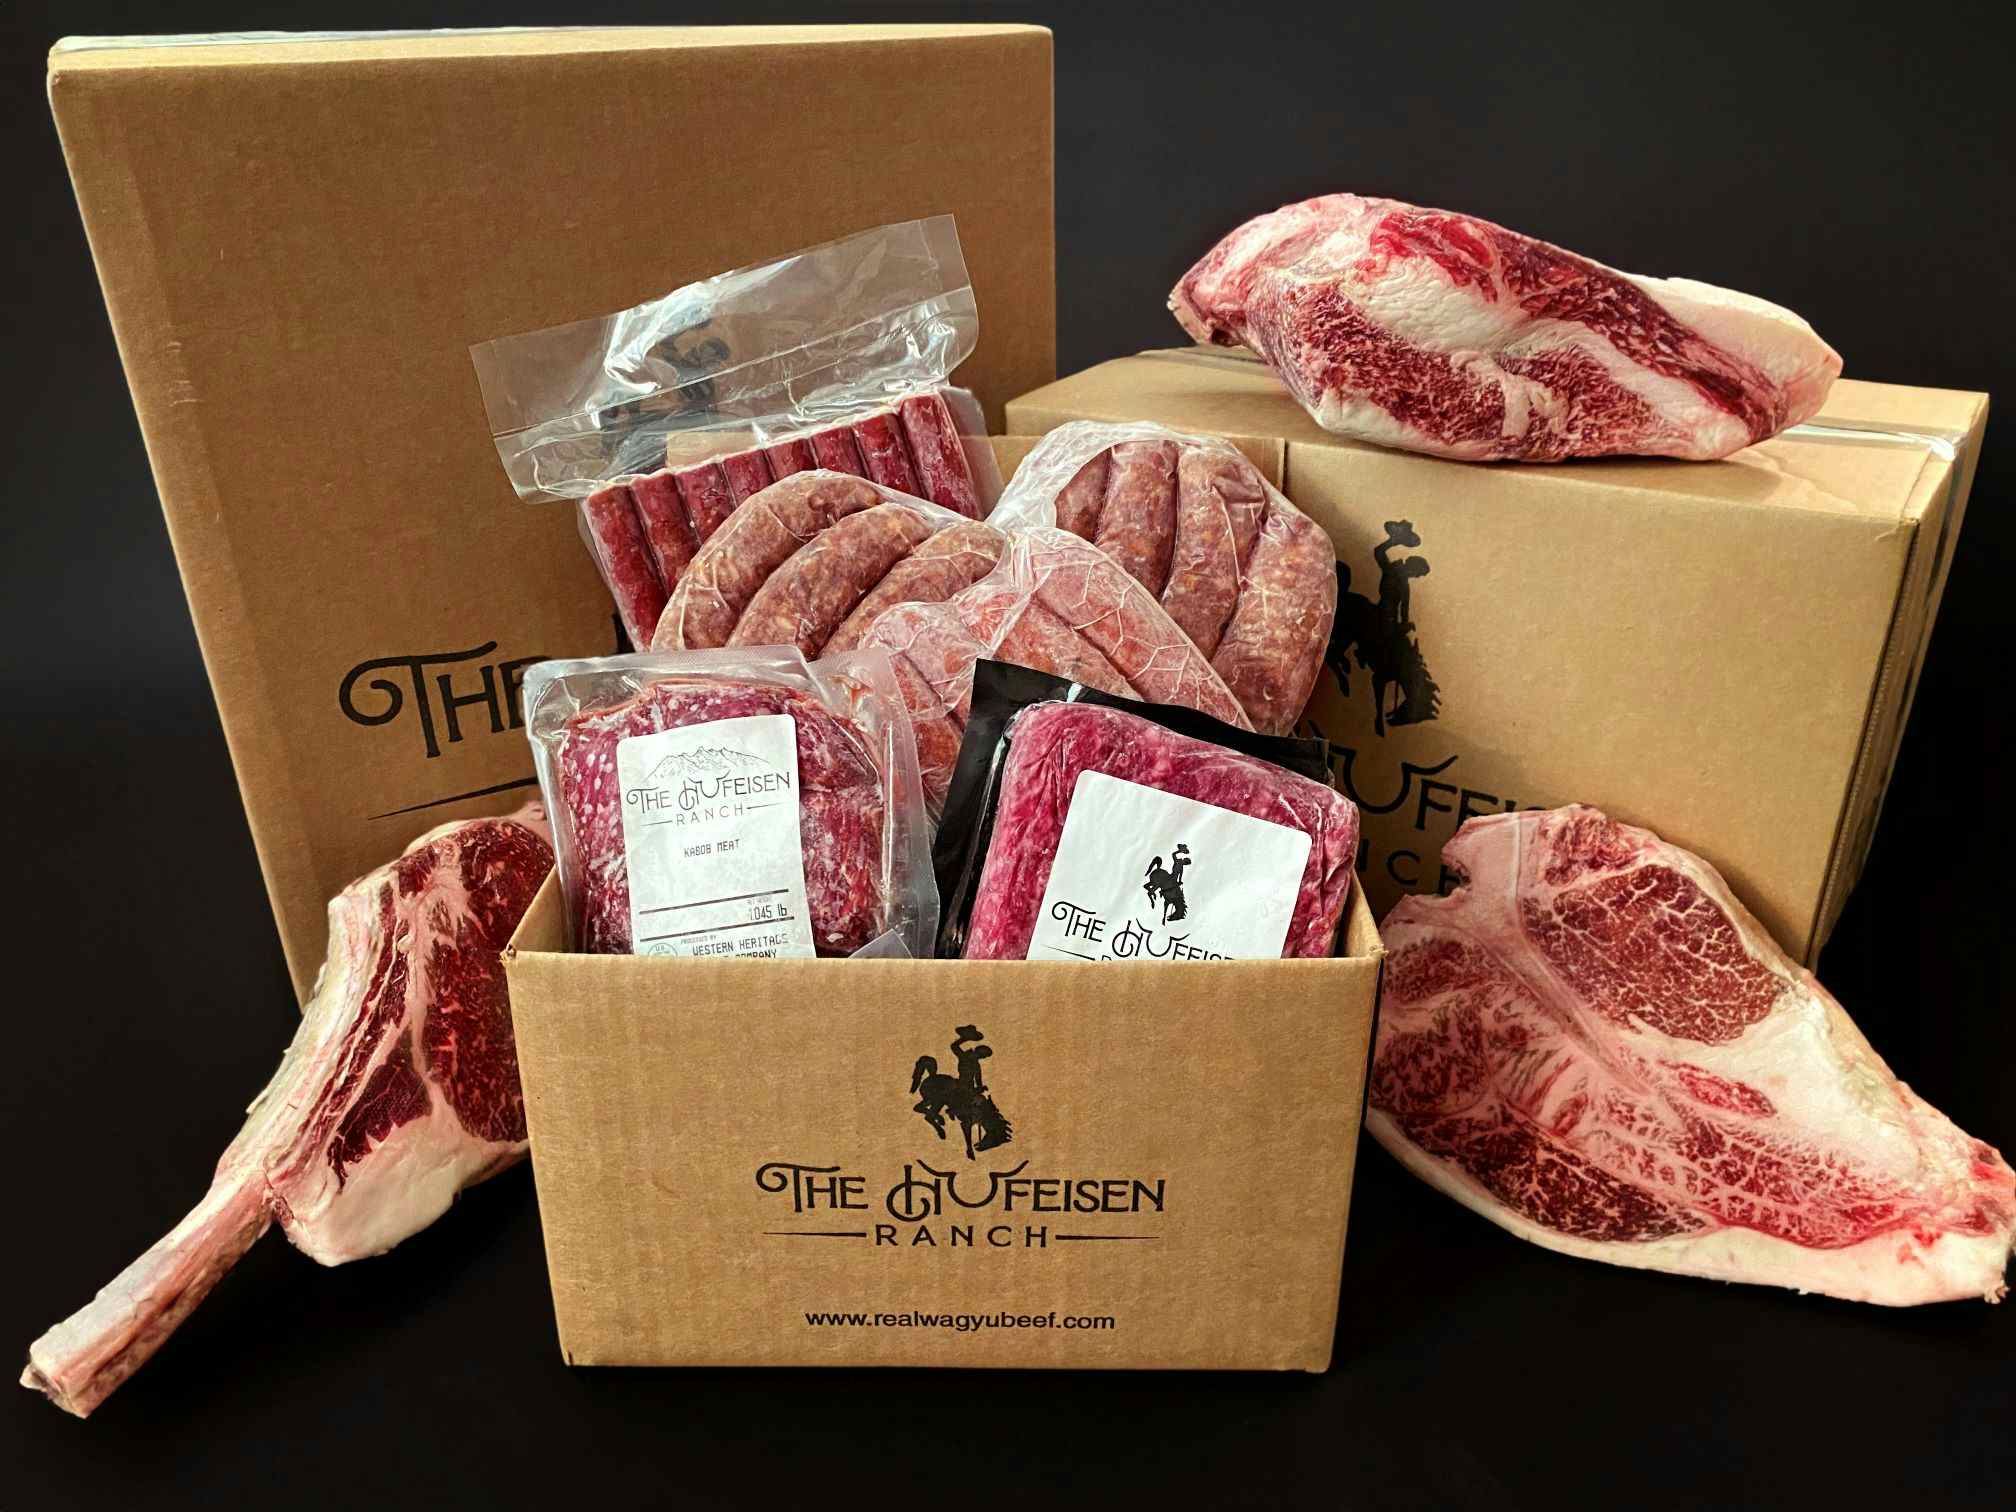 100% All-Natural Grass & Flax Fed Wagyu 1/2 Beef Box - 200lbs of Wagyu Beef